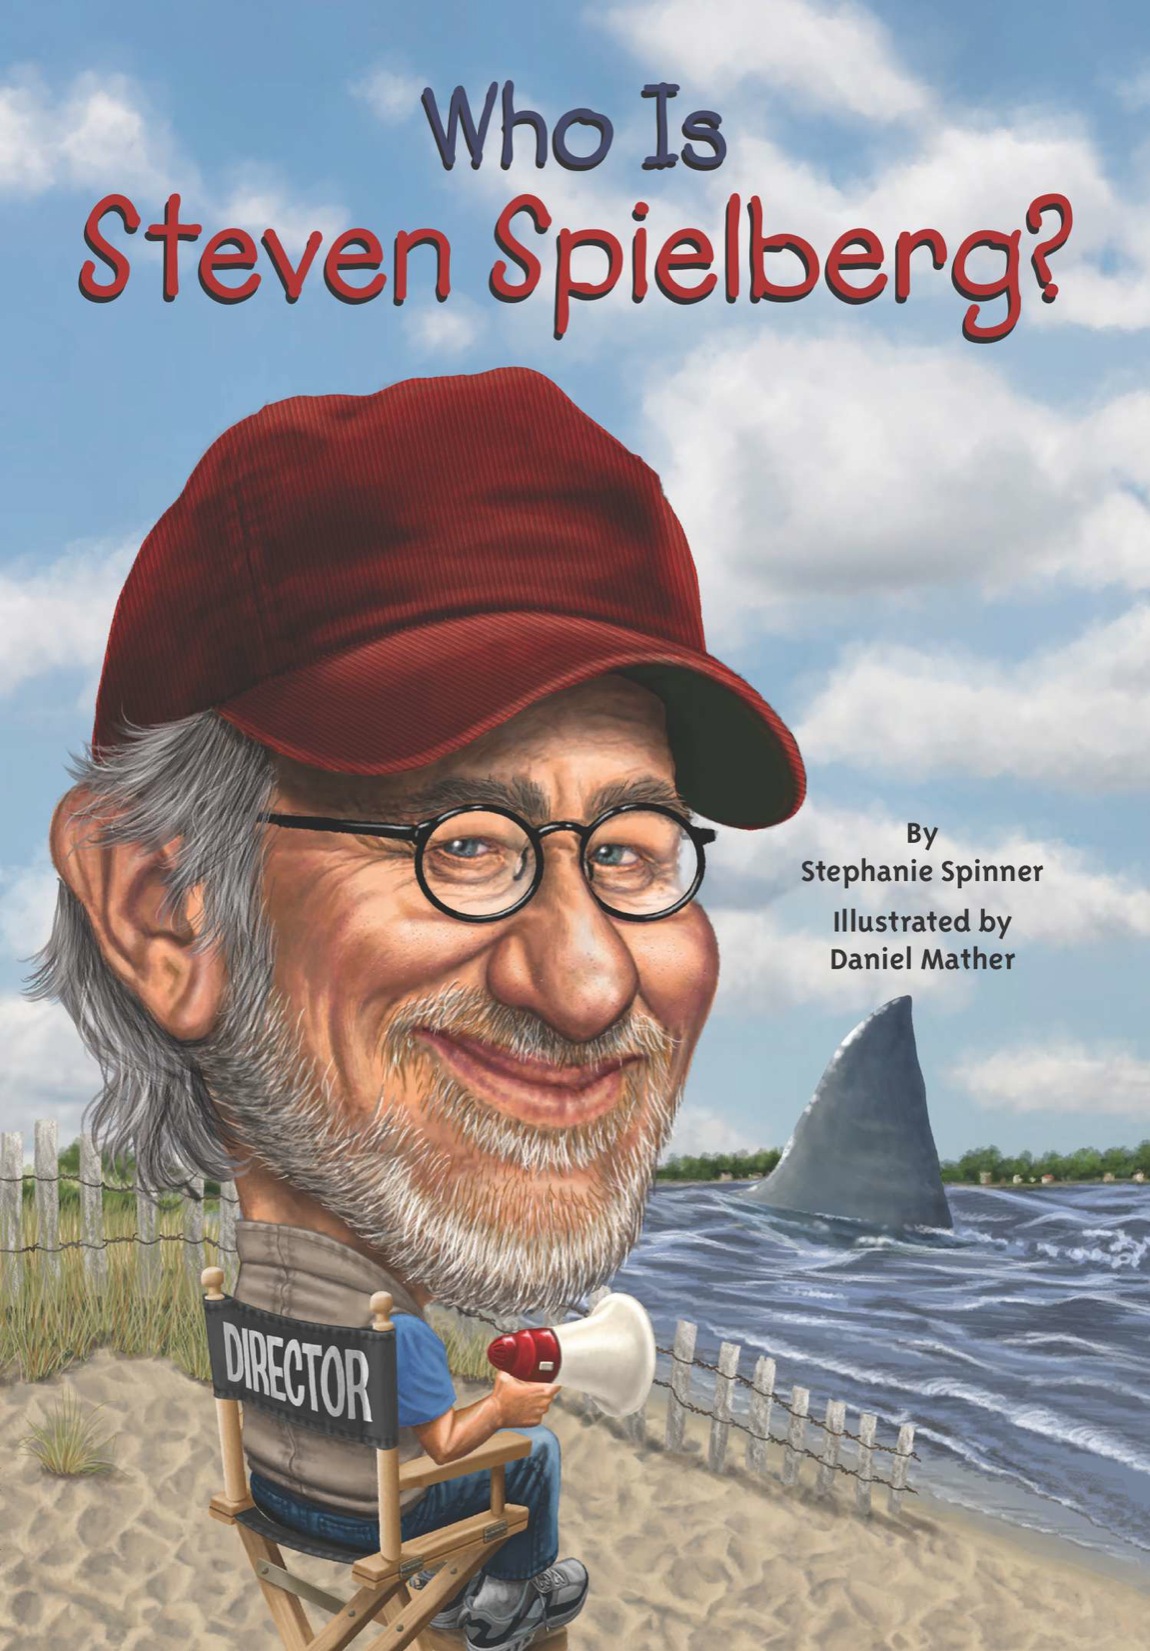 Who Is Steven Spielberg By Stephanie Spinner Illustrated by Daniel Mather - photo 1